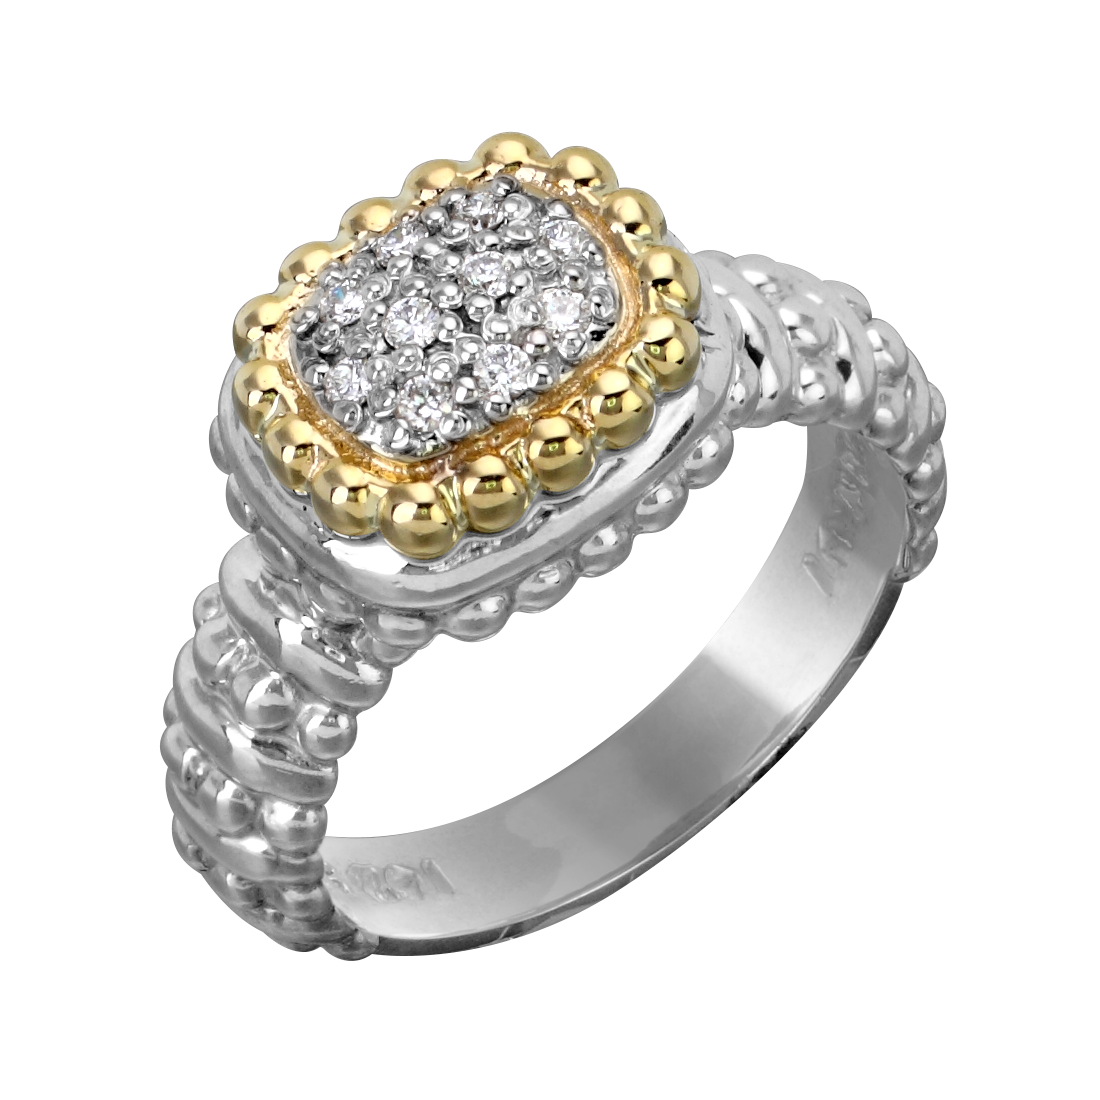 Vahan Sterling Silver & Yellow Gold Diamond Fashion Ring Storey Jewelers Gonzales, TX